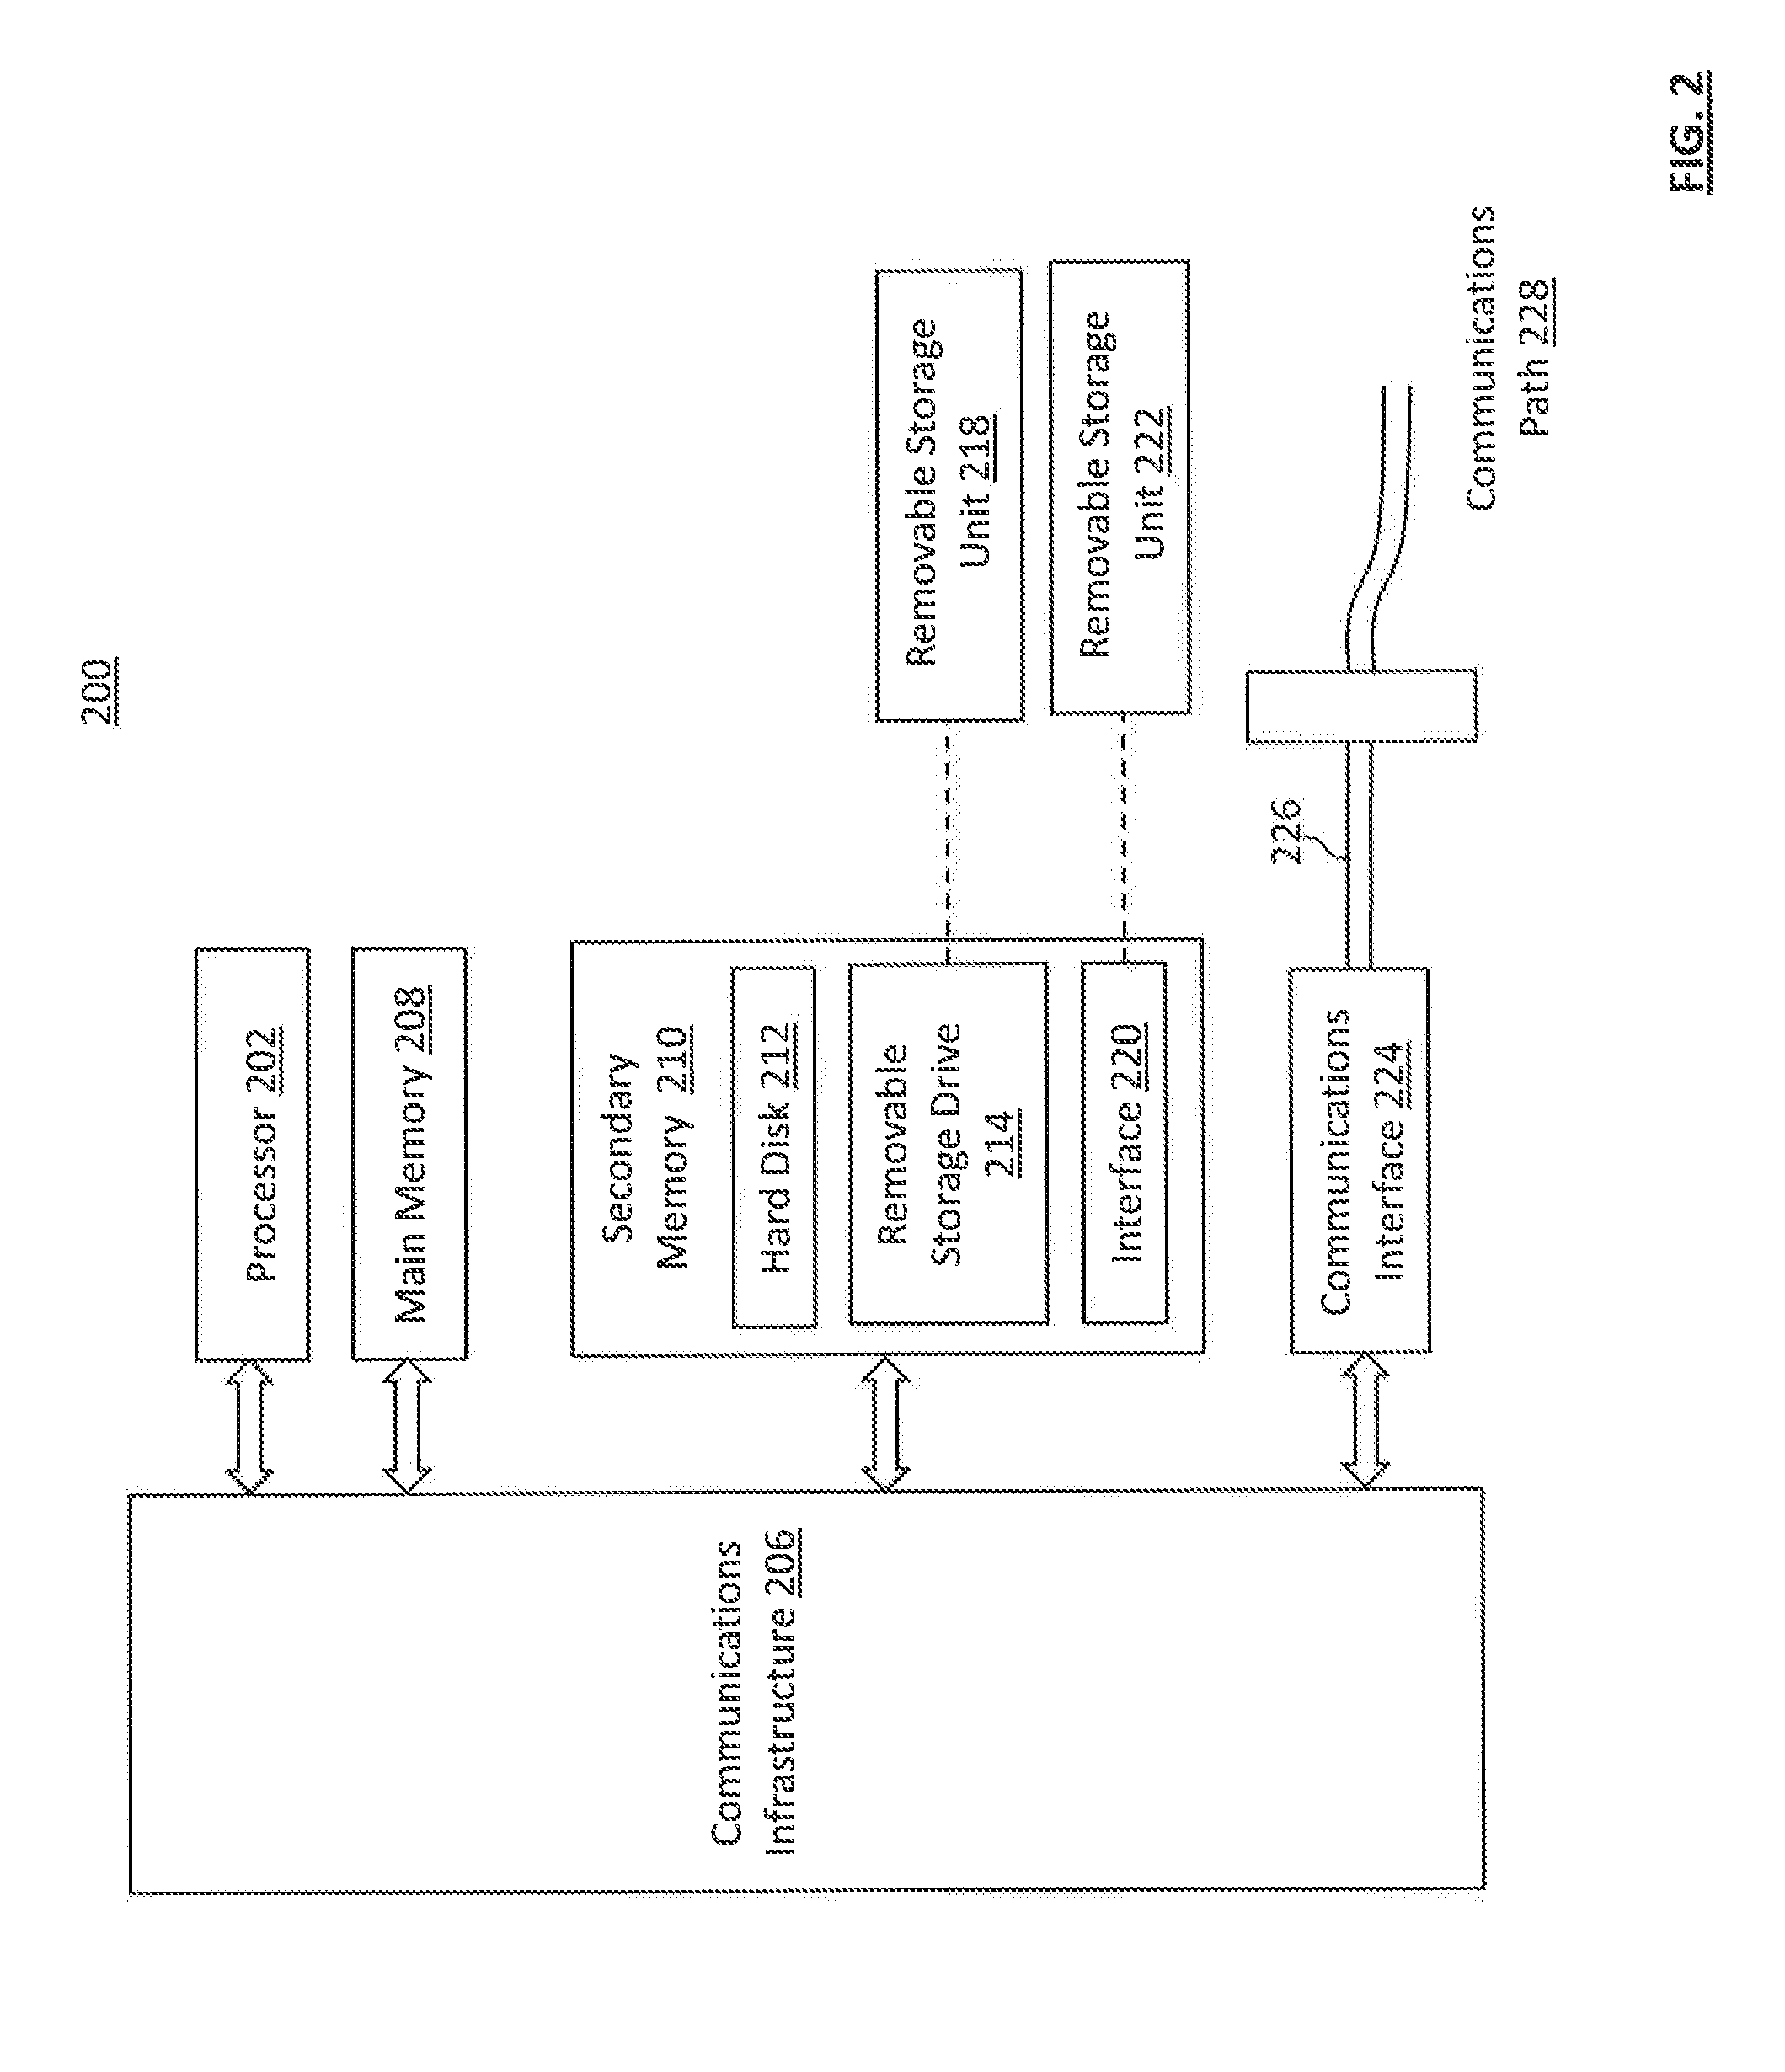 Systems and methods for identifying electronic content using video graphs